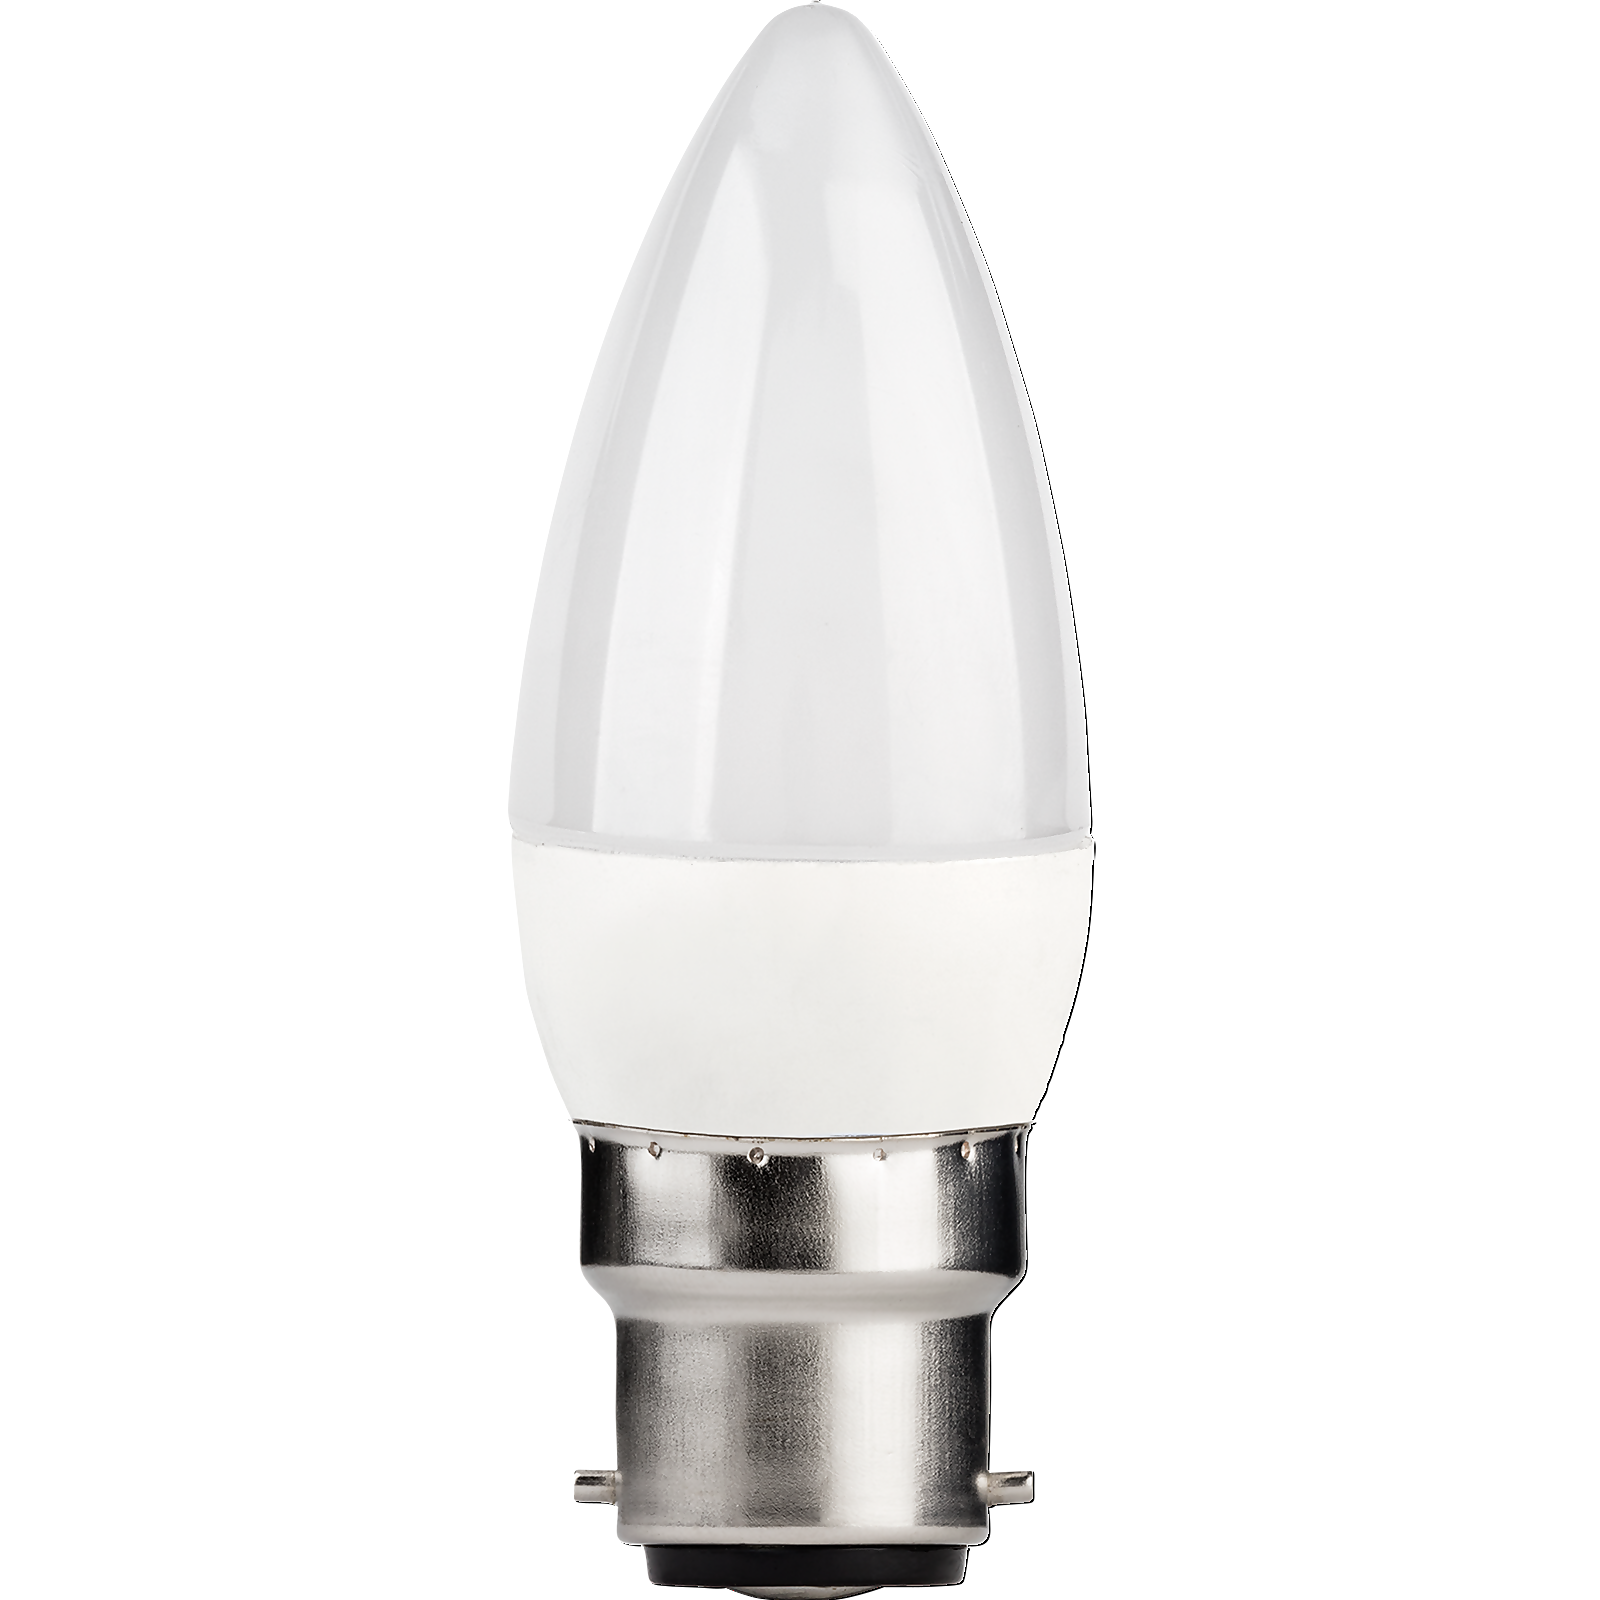 Photo of Tcp Led Candle 40w Bc Dimmable Warm White Bulb 1pk